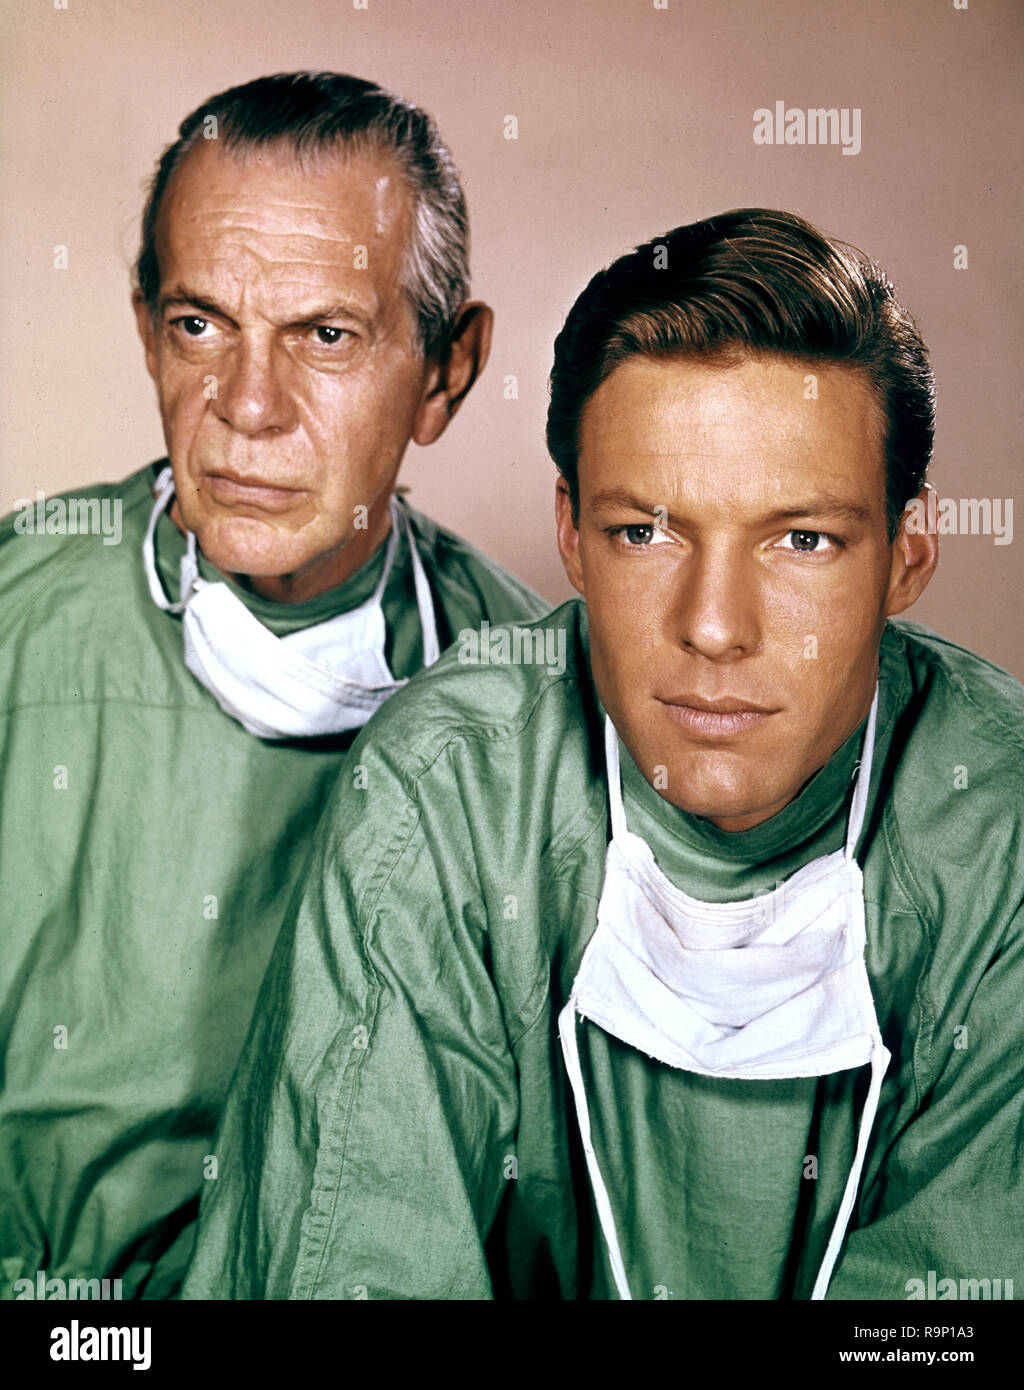 Raymond Massey, Richard Chamberlain,  publicity photo for, 'Dr. Kildare' tv series, MGM Television, circa 1962   File Reference # 33635 768CPC Stock Photo